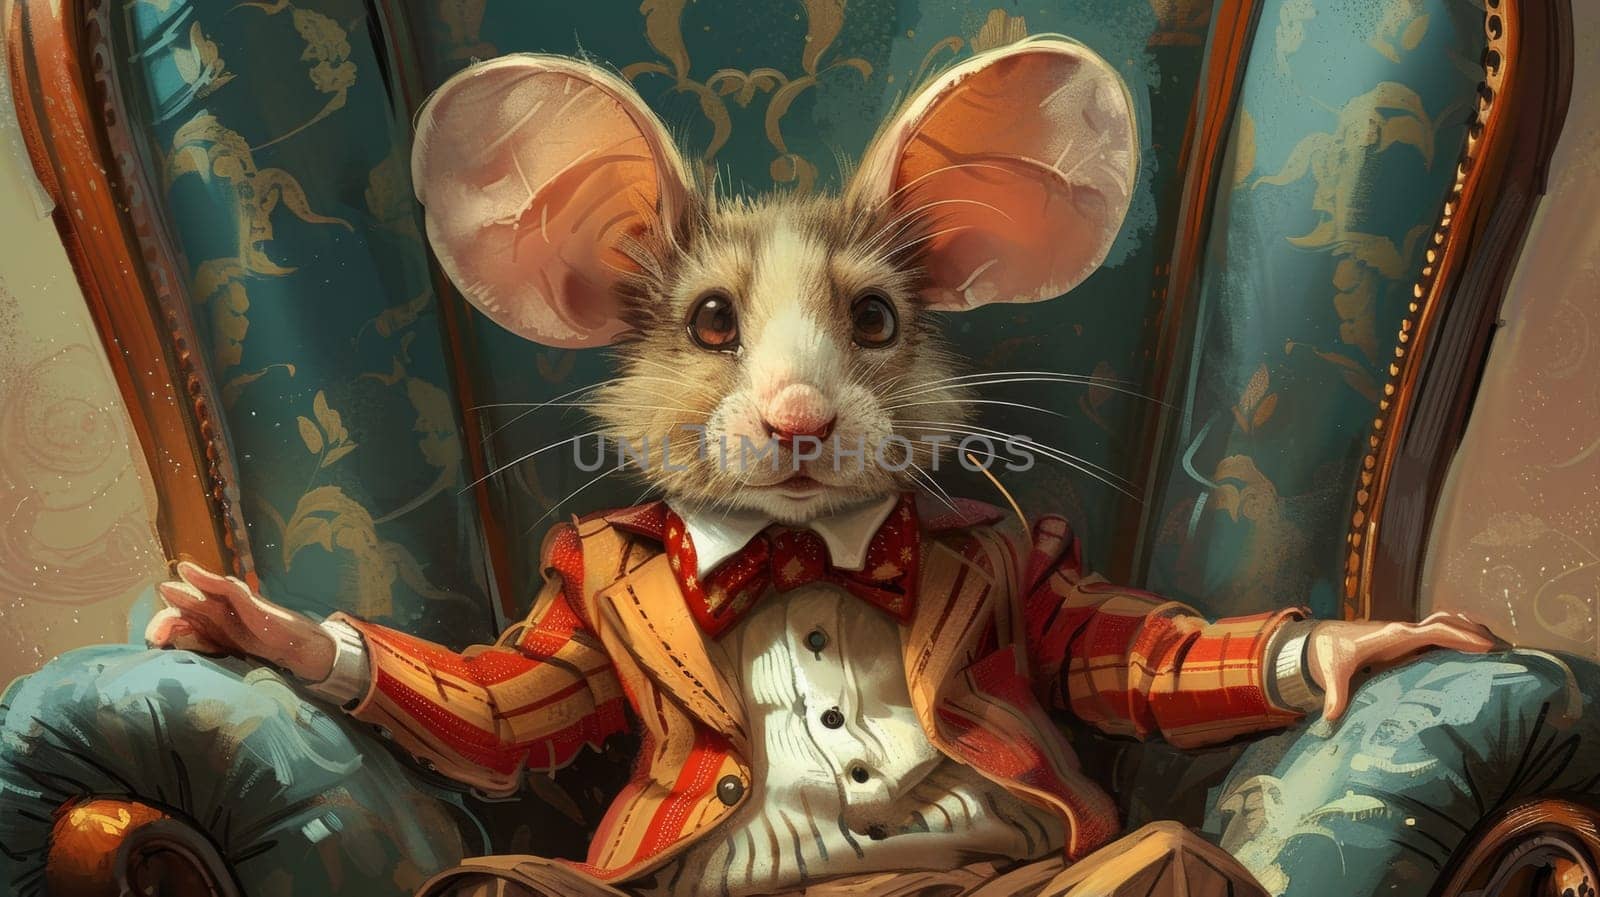 A mouse in a suit sitting on top of an ornate chair